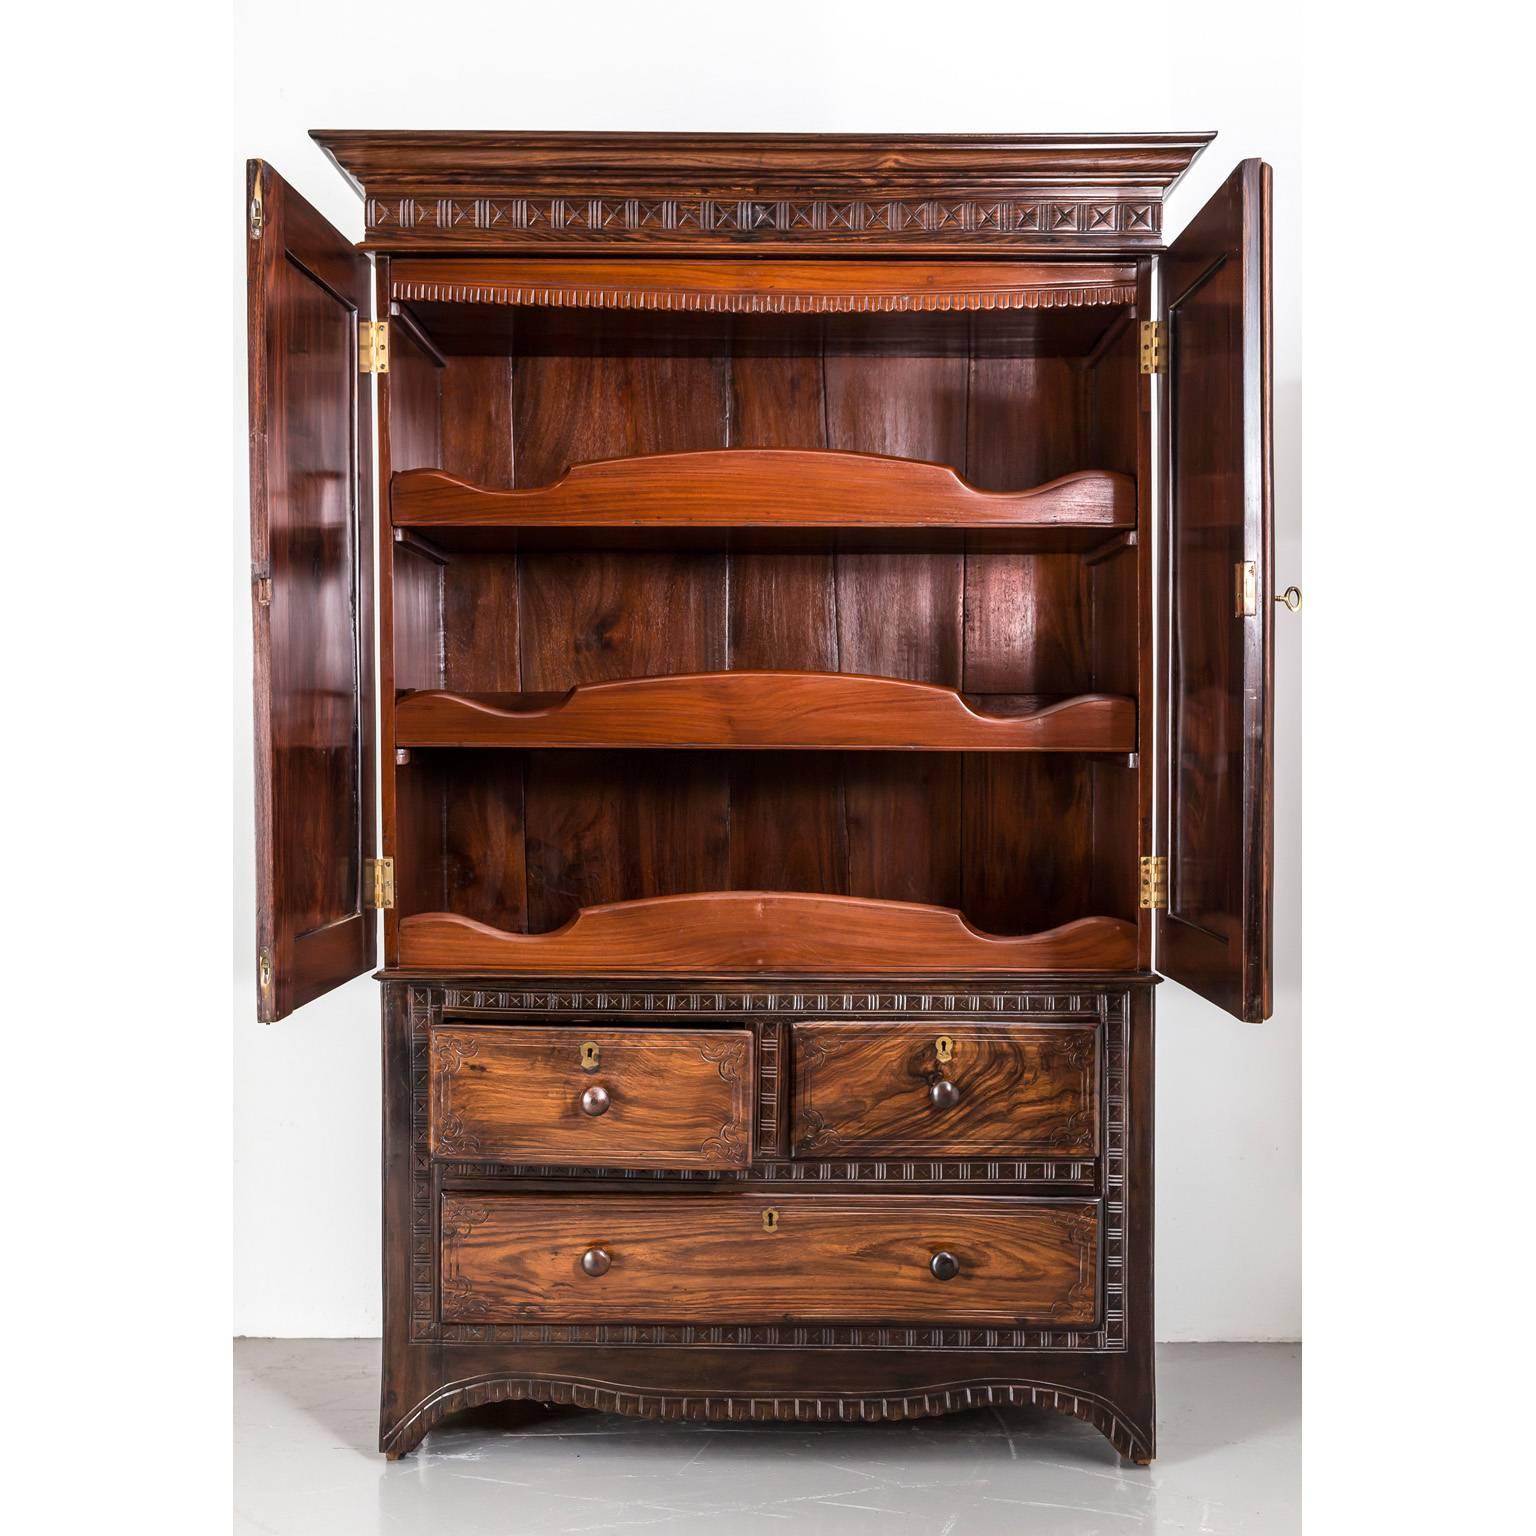 A Portuguese colonial rosewood cupboard beautifully designed and crafted with a pattern exclusive to Portuguese India. 
The double doors have floating panels that display a sunburst carving and floral carving in the corners. The interior in